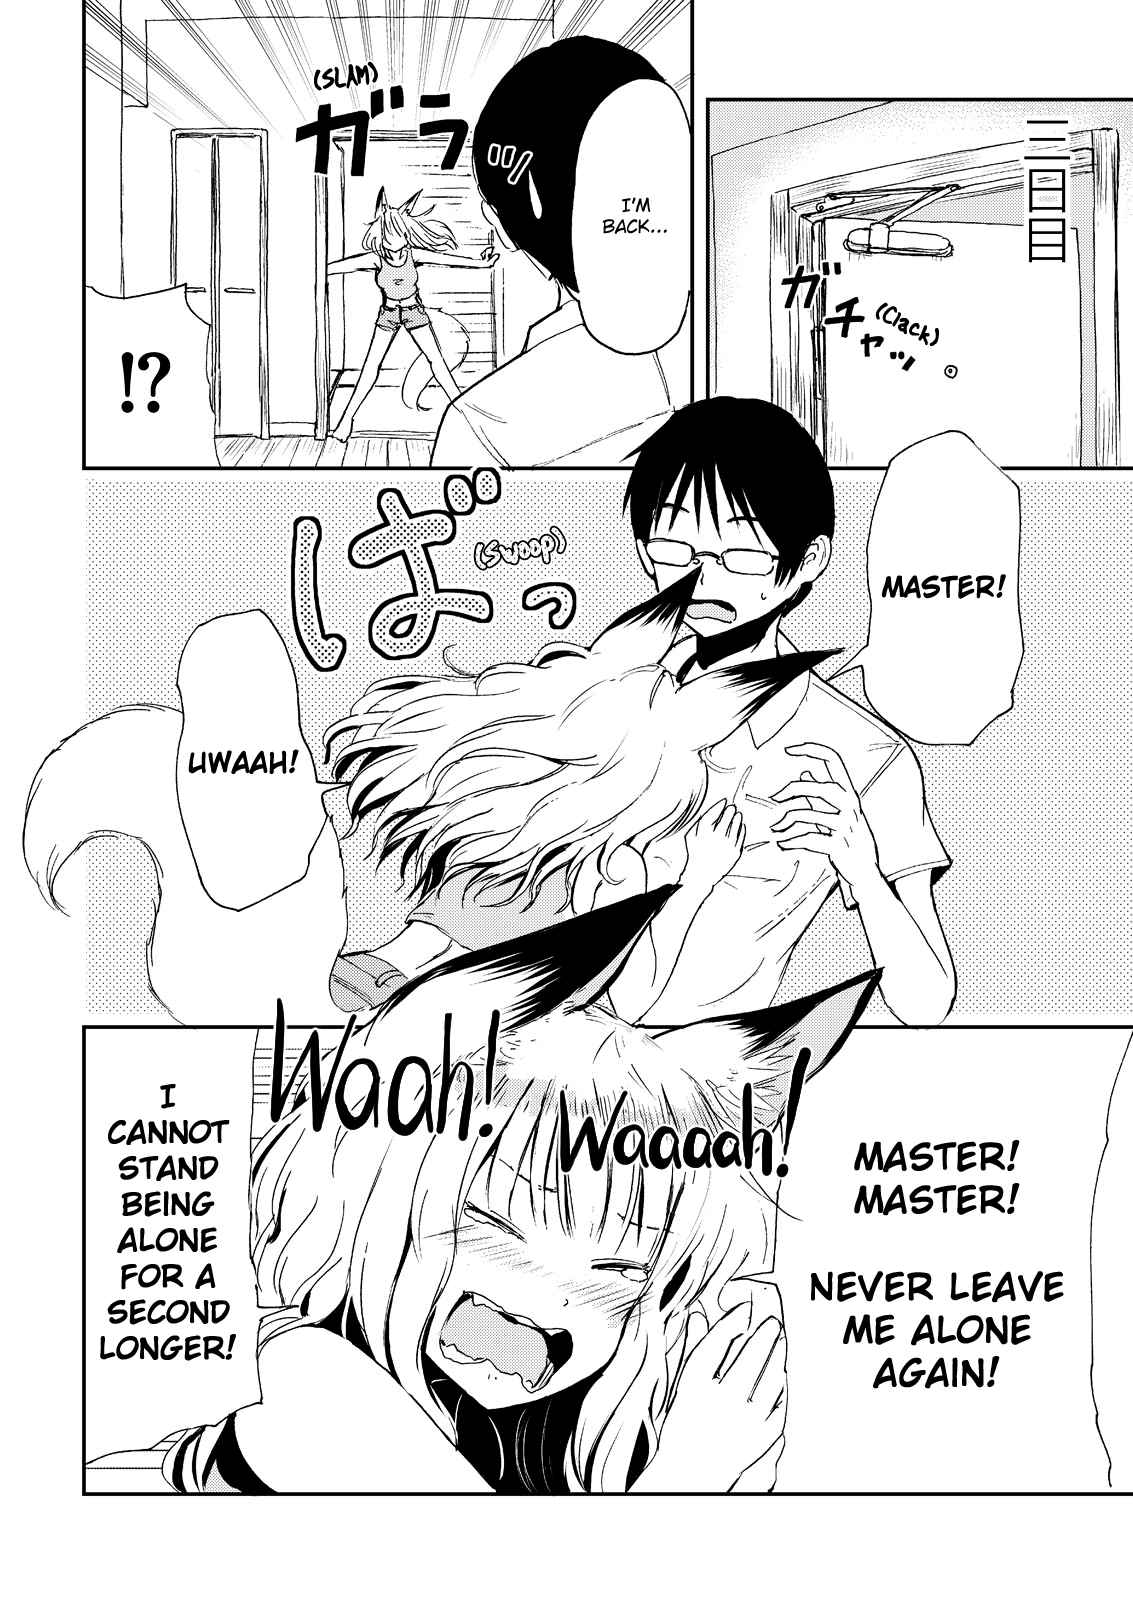 Kitsune no Oyome chan Vol. 1 Ch. 5 When I Left the House in my Kitsune Wife's Care